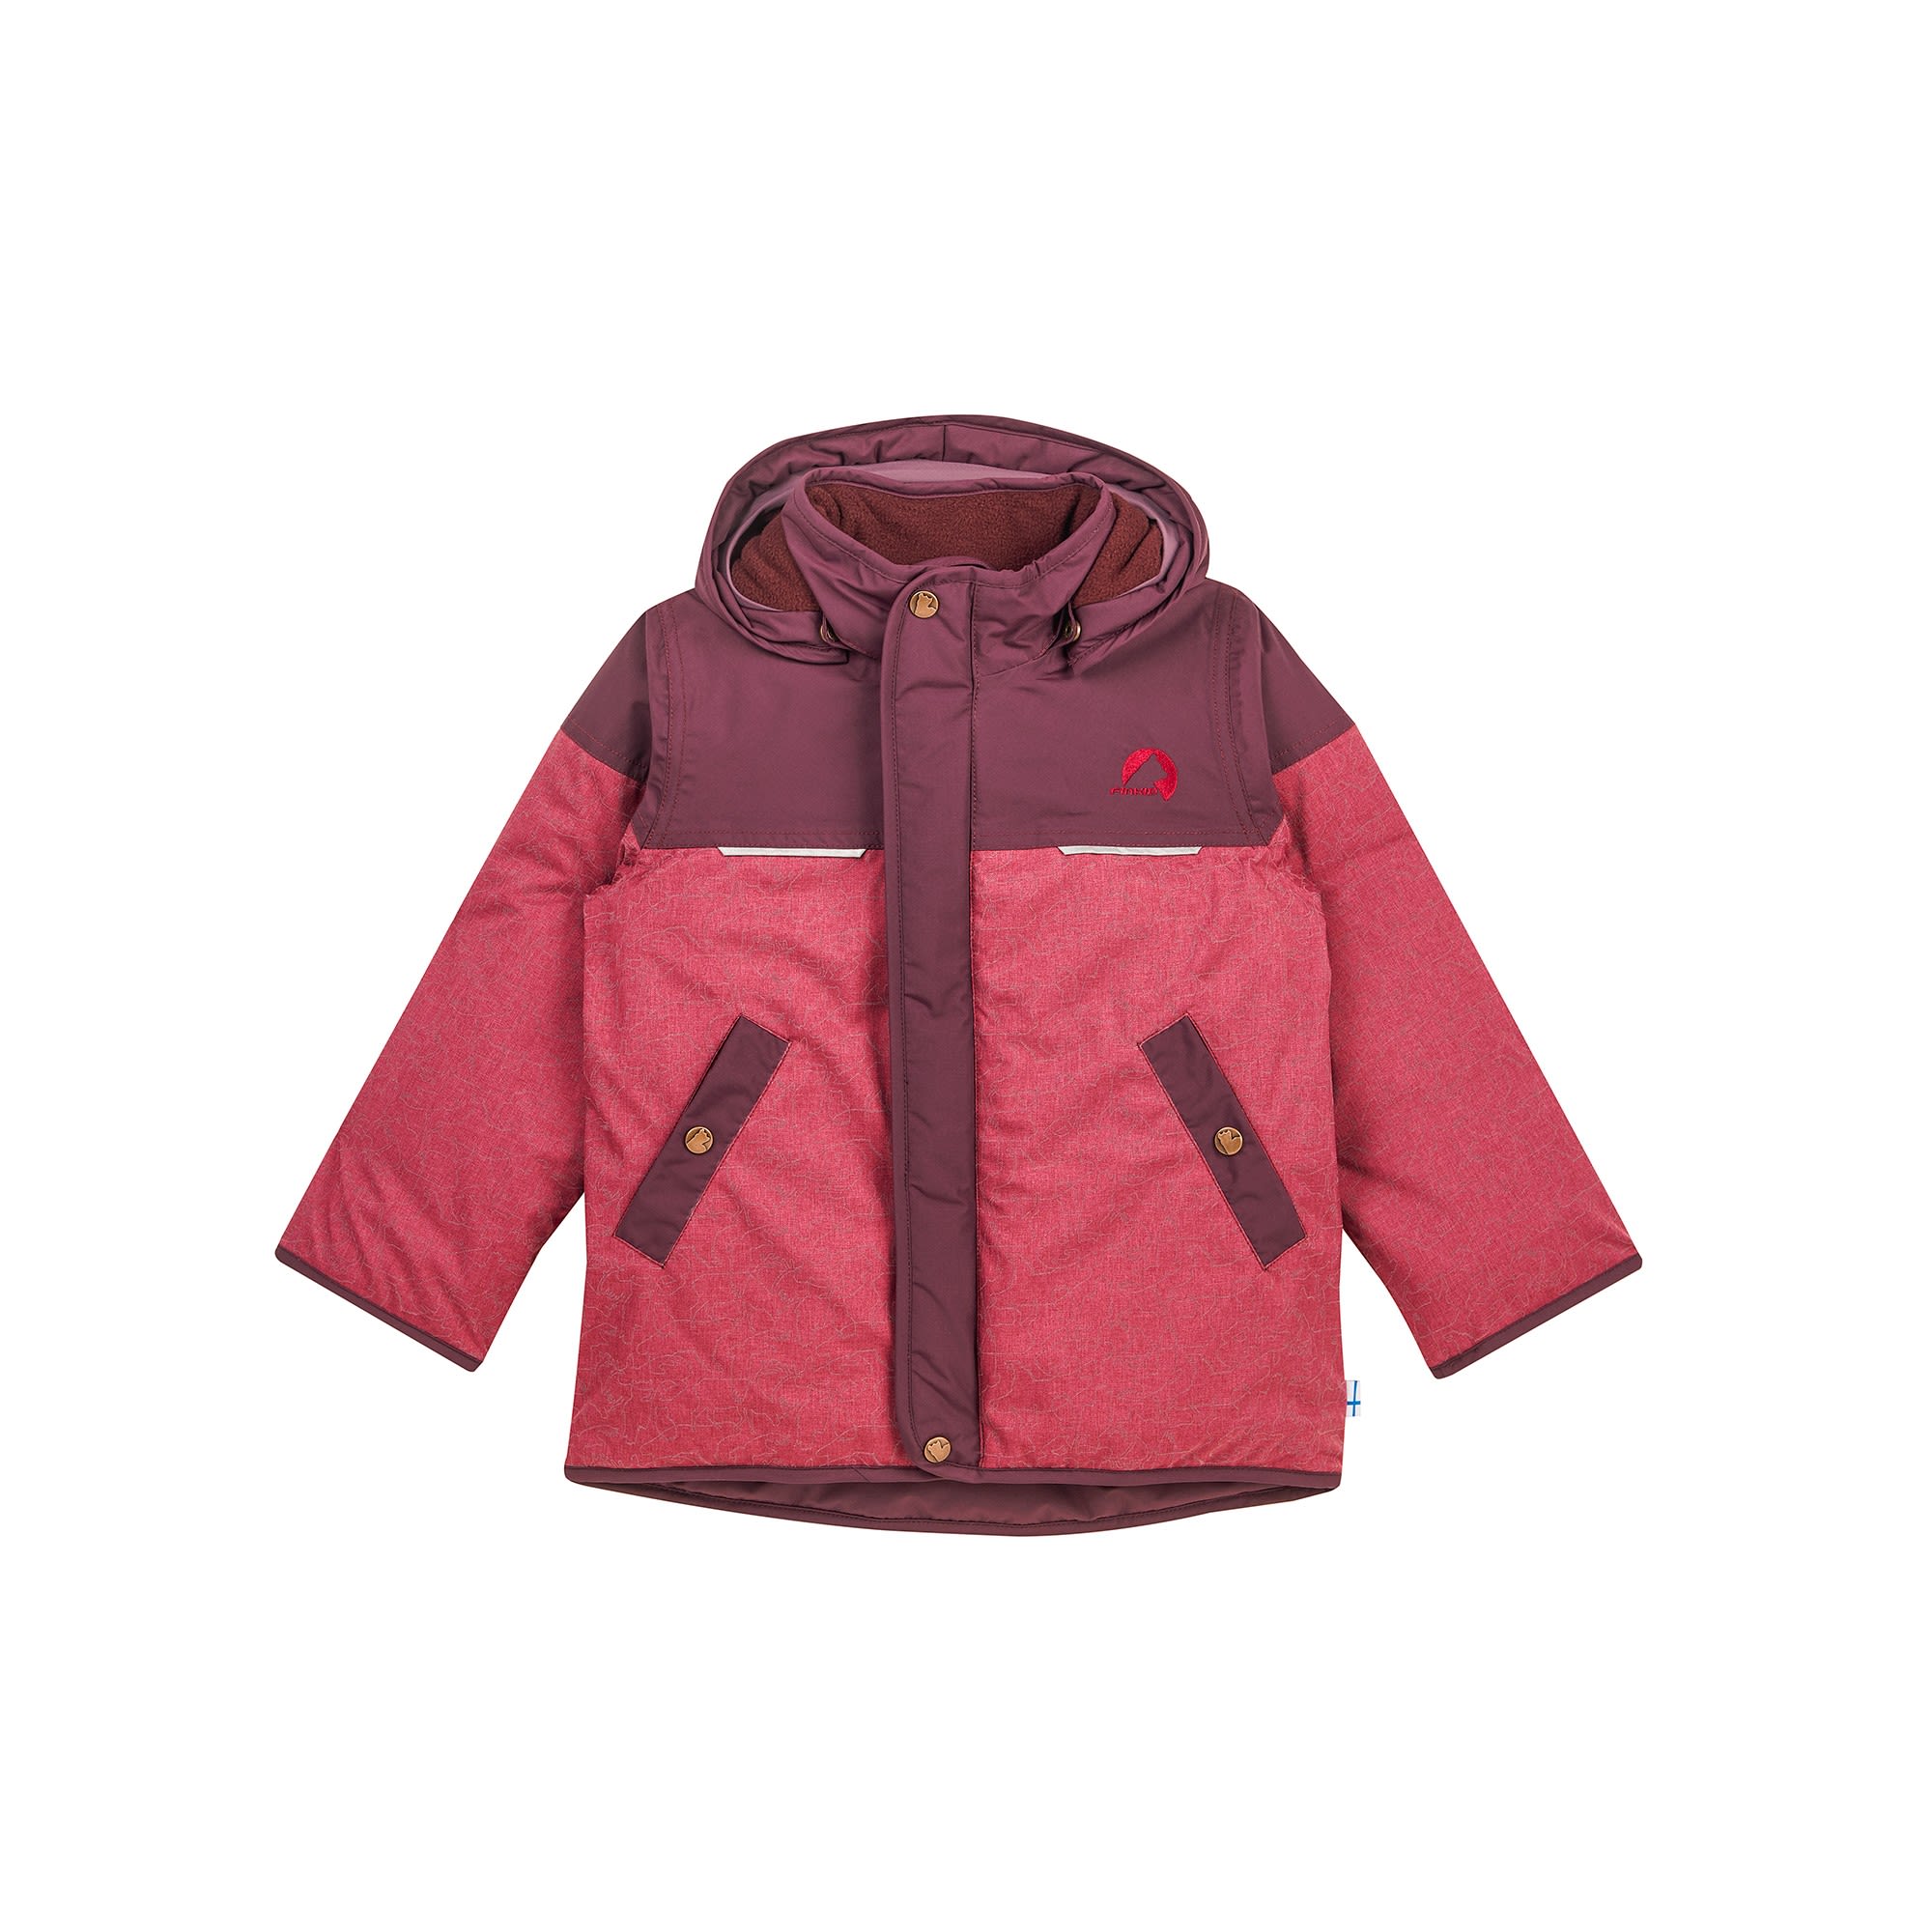 Finkid Koira Ice (Vorgngermodell) Colorblock - Rot- Anoraks- Grsse 80 - 90 - Farbe Beet Red - Eggplant unter Finkid